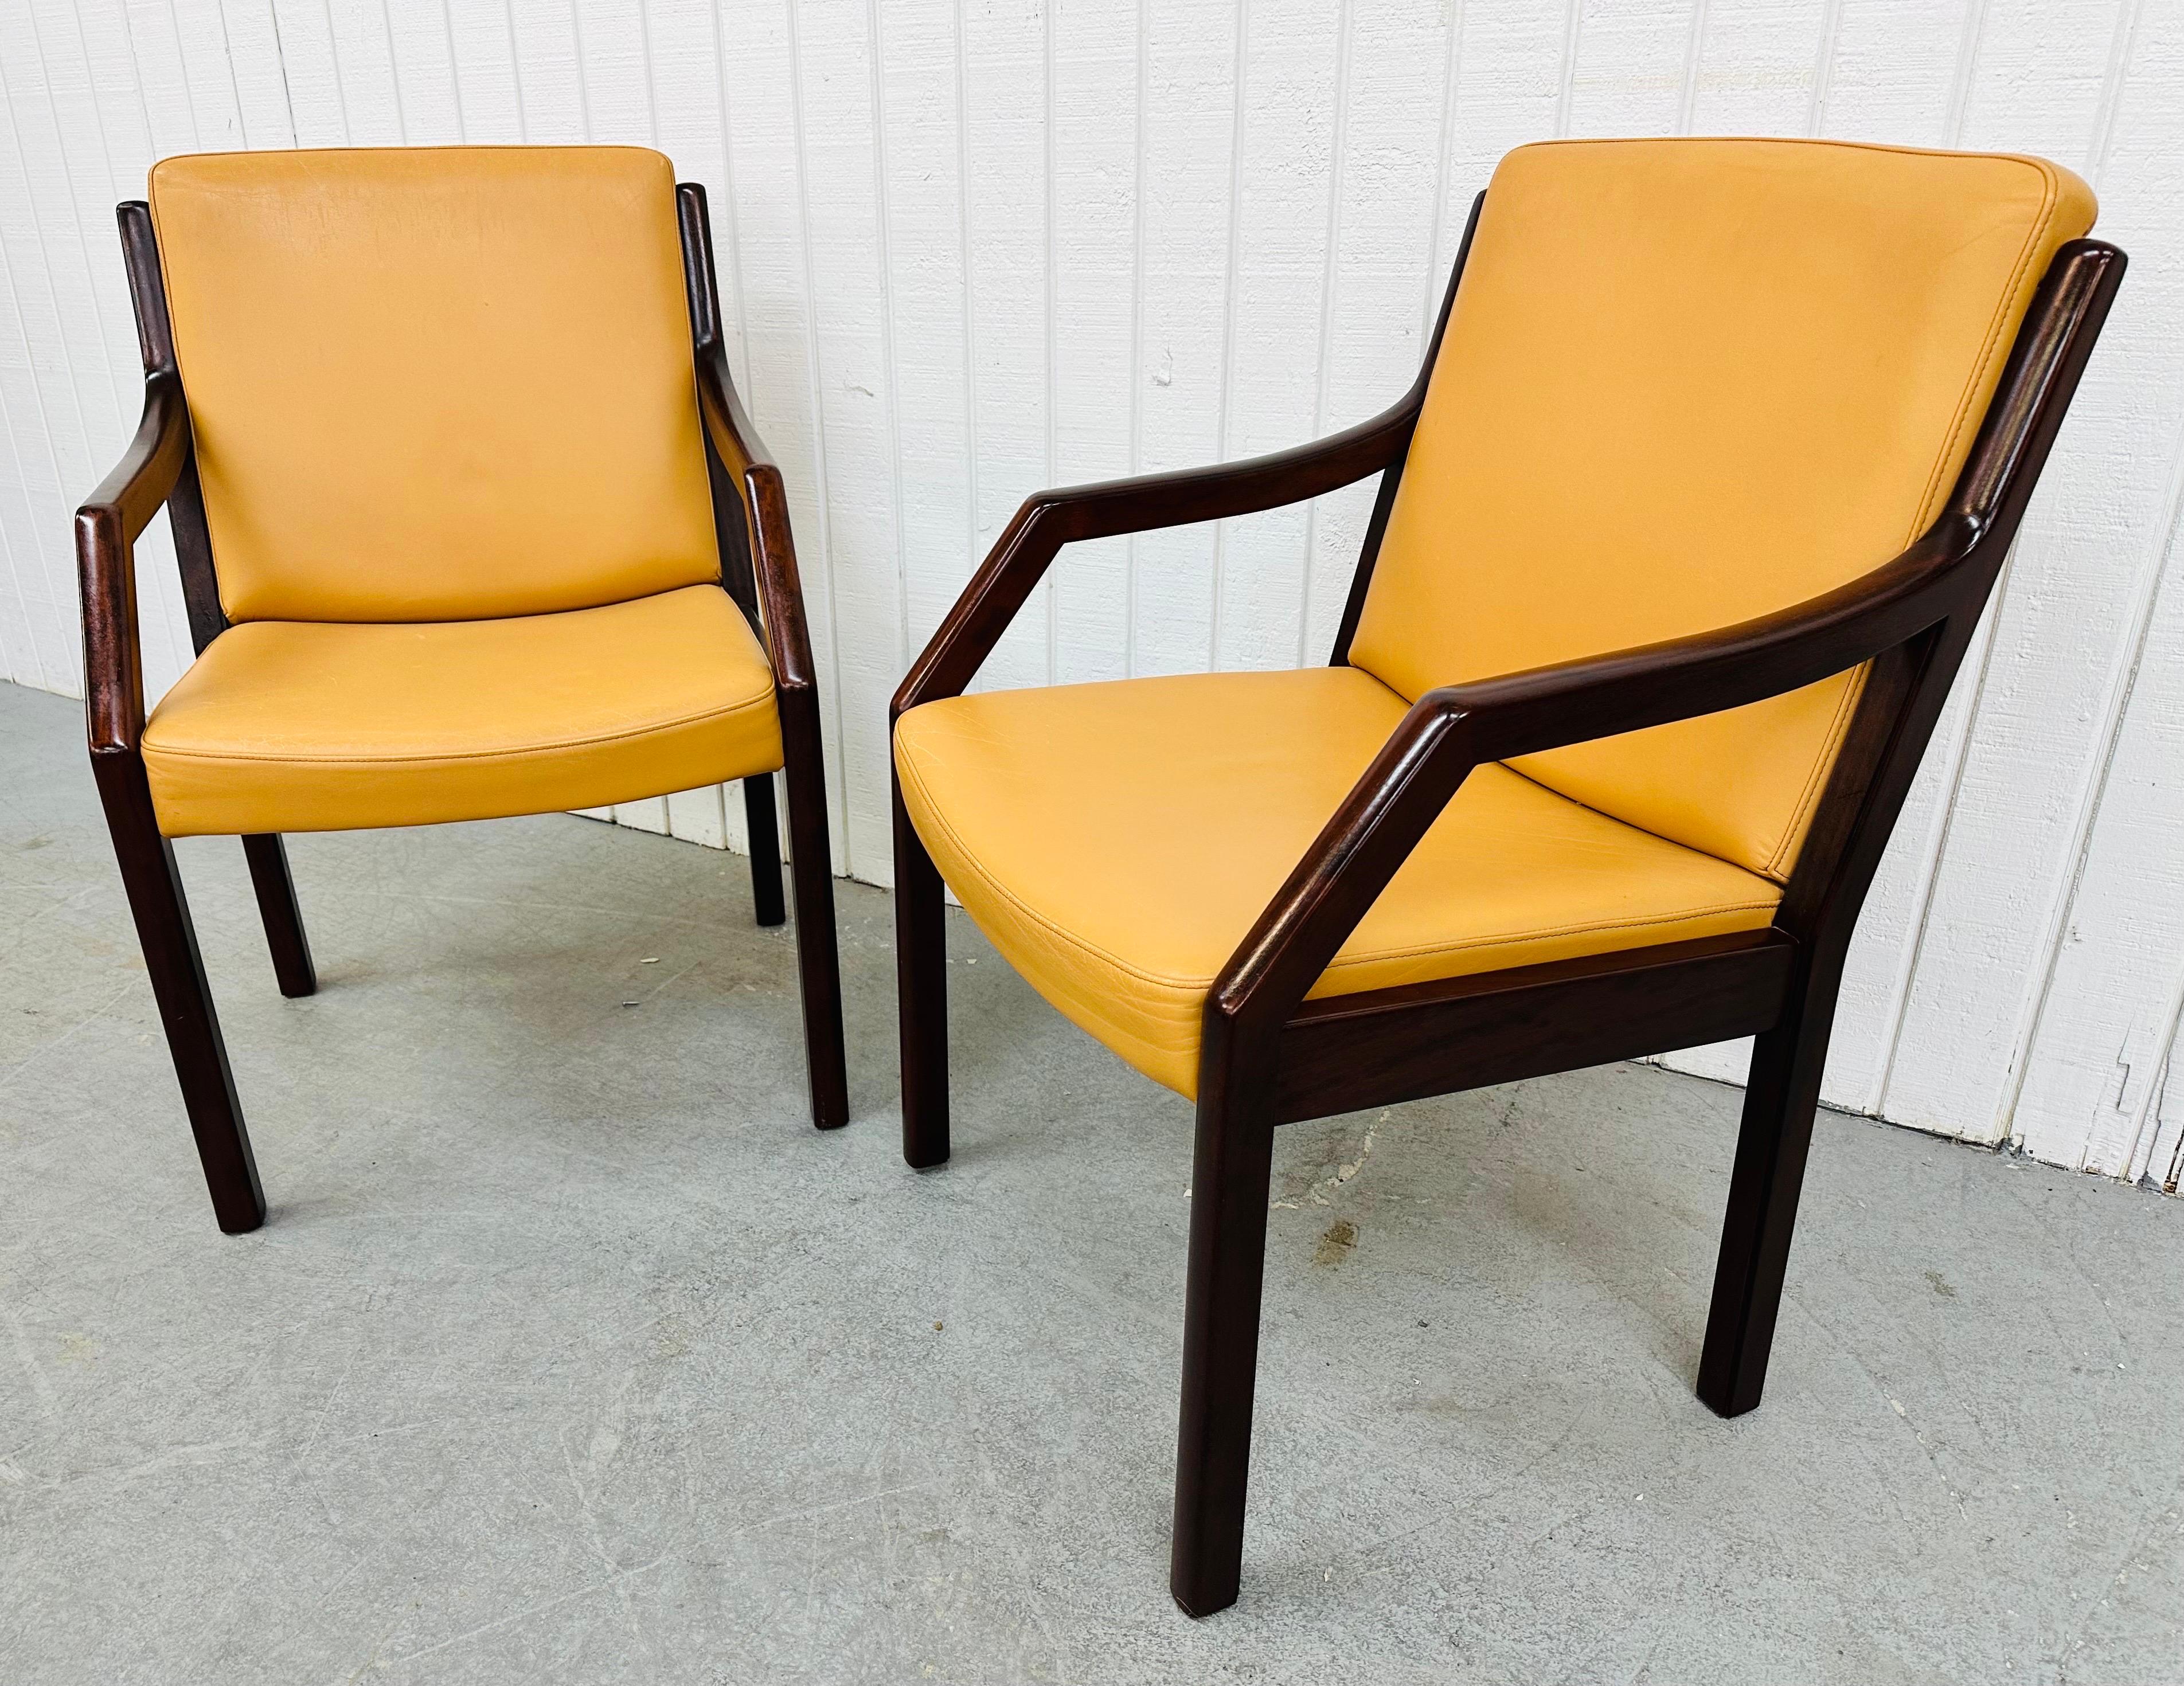 This listing is for a pair of vintage Dunbar Style Lounge Chairs. Featuring wooden frames, bent arm design, modern legs, golden leather upholstery, and a dark mahogany finish. This is an exceptional combination of quality and design!